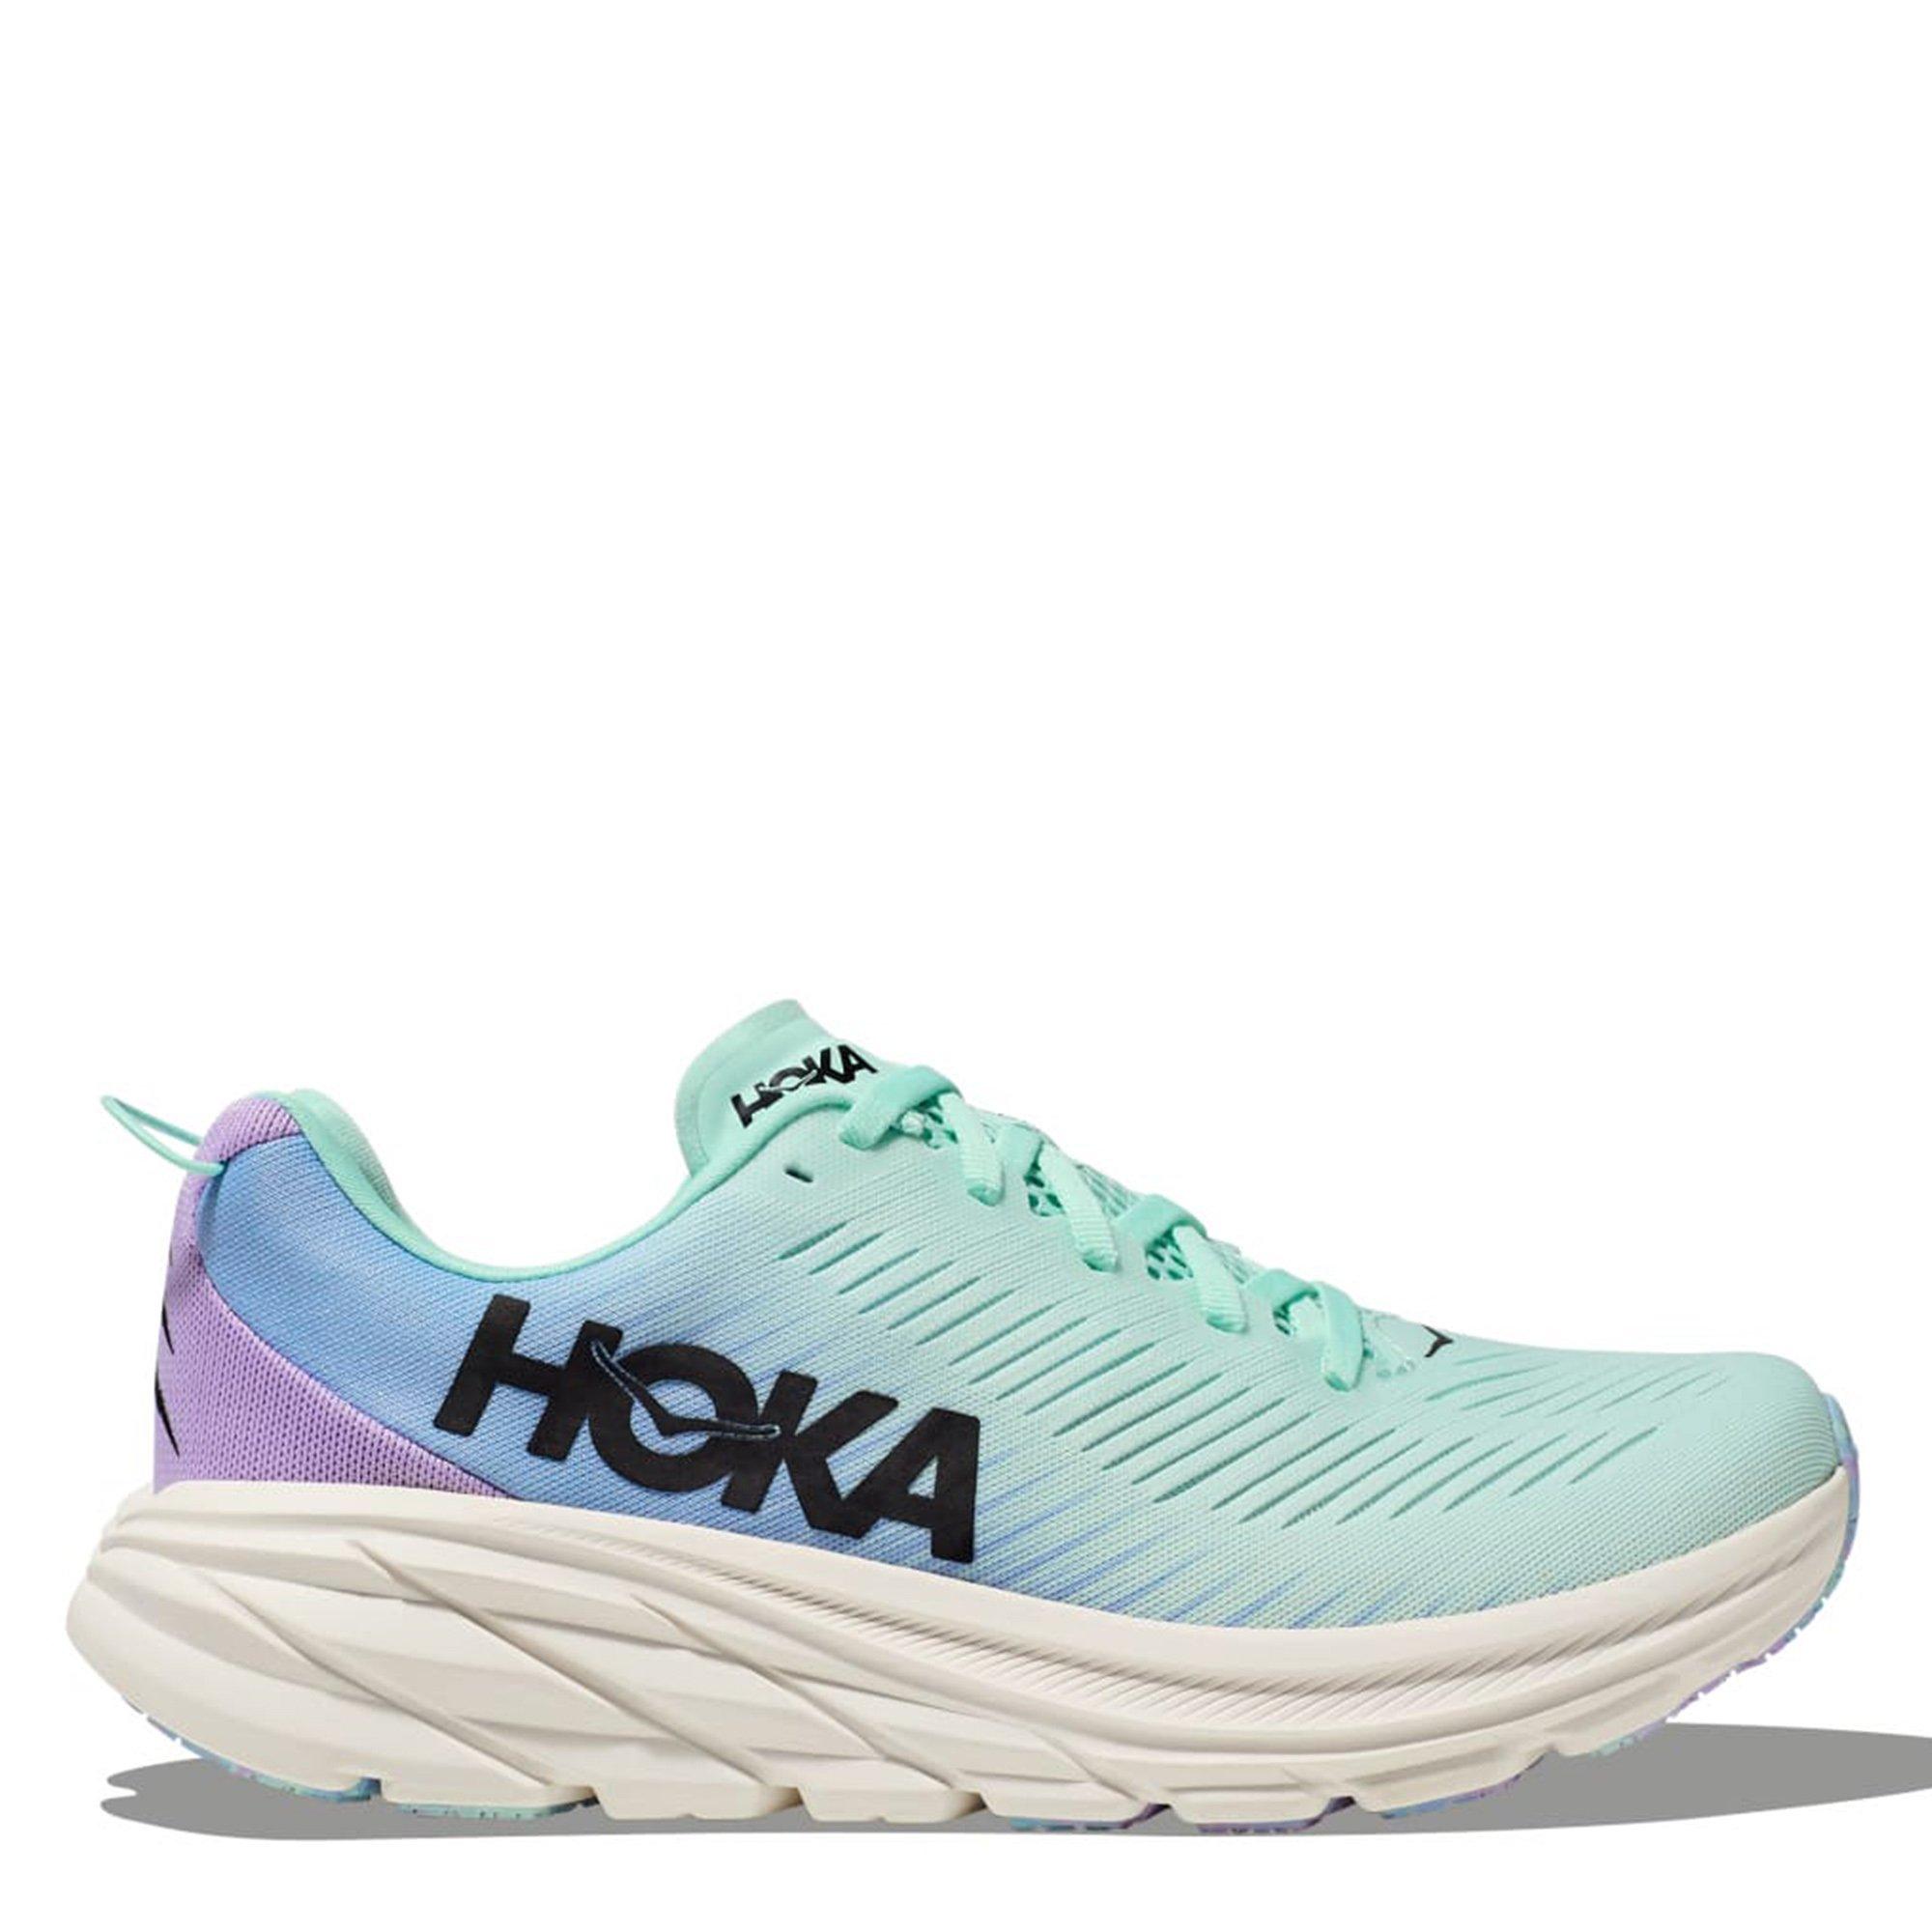 Hoka | Rincon 3 Wide Womens Running Shoes | Everyday Neutral Road ...